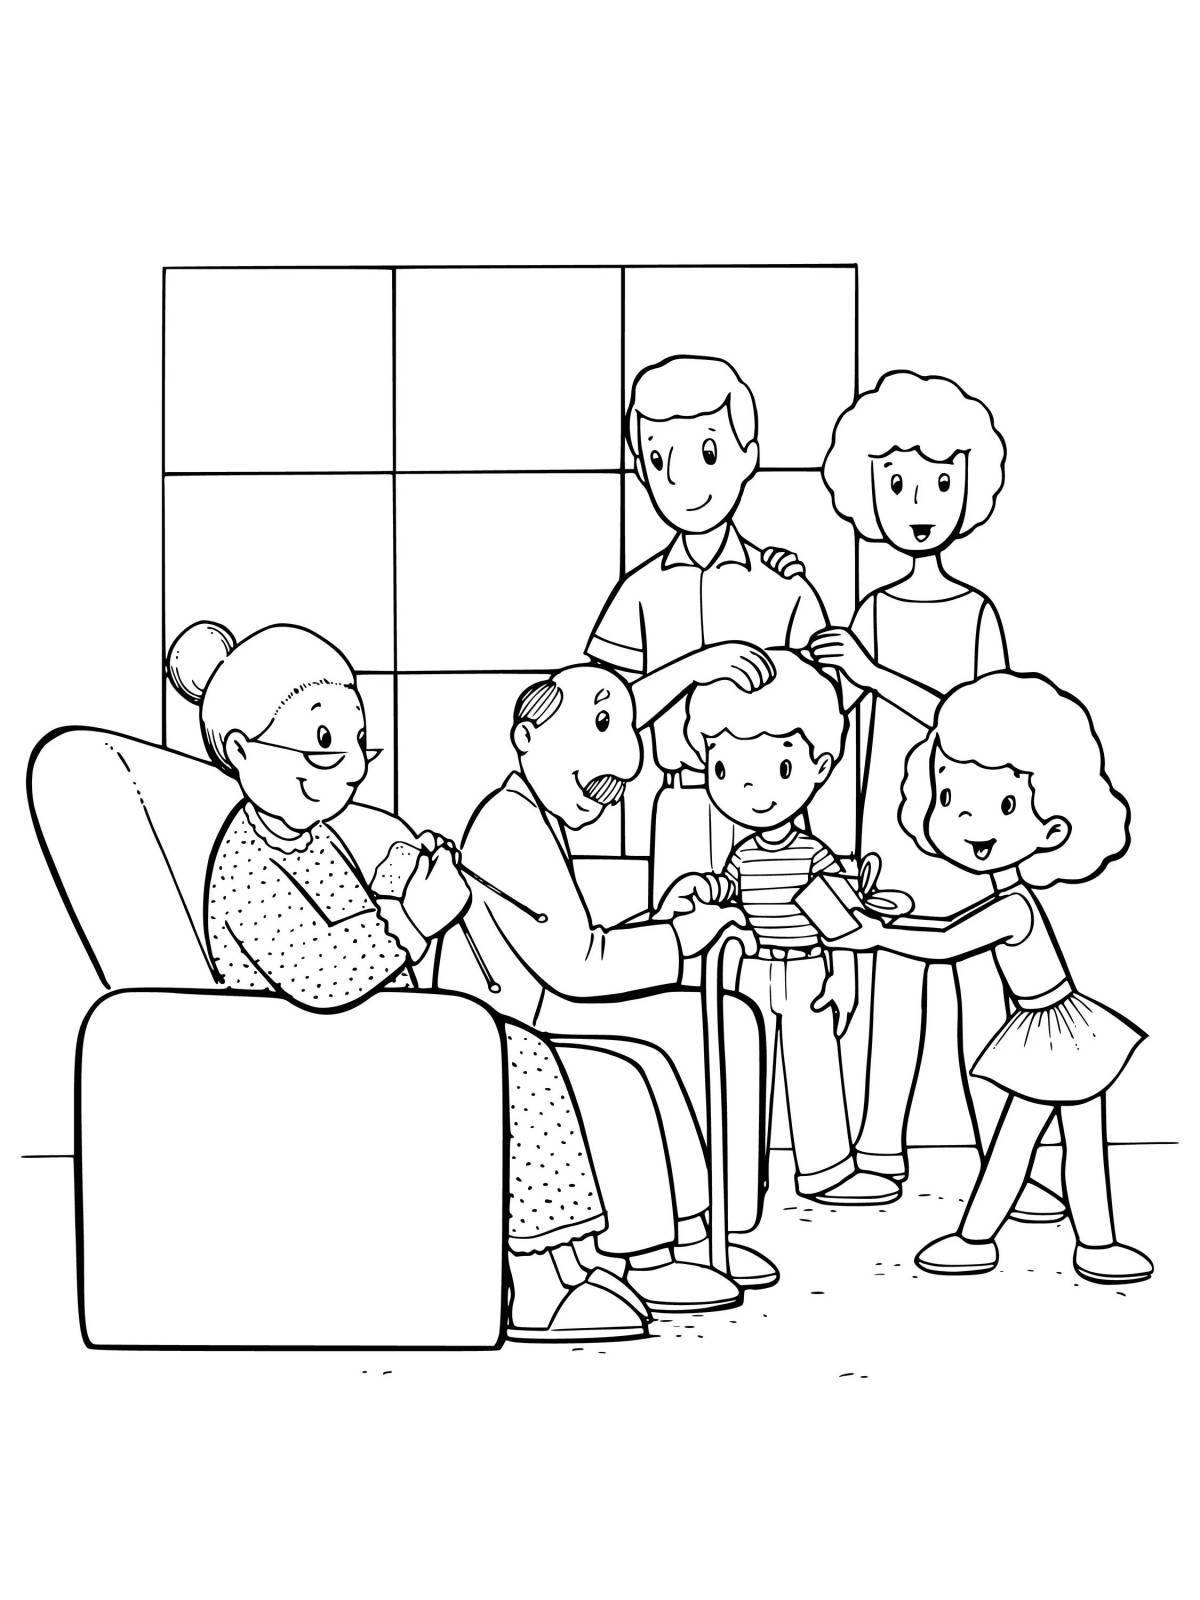 Creative drawing family page